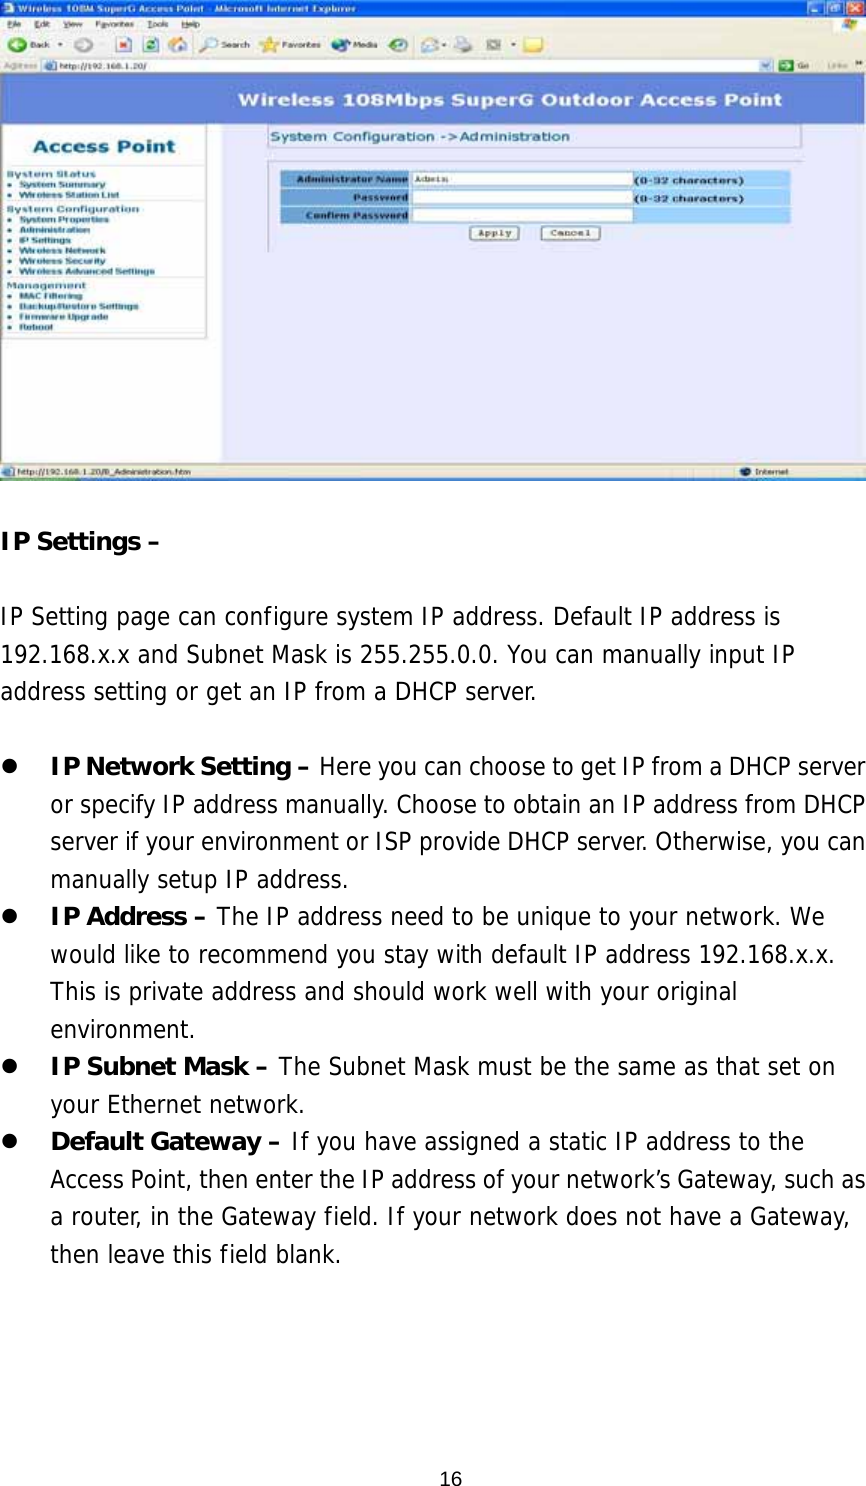  16  IP Settings –    IP Setting page can configure system IP address. Default IP address is 192.168.x.x and Subnet Mask is 255.255.0.0. You can manually input IP address setting or get an IP from a DHCP server.    IP Network Setting – Here you can choose to get IP from a DHCP server or specify IP address manually. Choose to obtain an IP address from DHCP server if your environment or ISP provide DHCP server. Otherwise, you can manually setup IP address.   IP Address – The IP address need to be unique to your network. We would like to recommend you stay with default IP address 192.168.x.x. This is private address and should work well with your original environment.   IP Subnet Mask – The Subnet Mask must be the same as that set on your Ethernet network.   Default Gateway – If you have assigned a static IP address to the Access Point, then enter the IP address of your network’s Gateway, such as a router, in the Gateway field. If your network does not have a Gateway, then leave this field blank. 